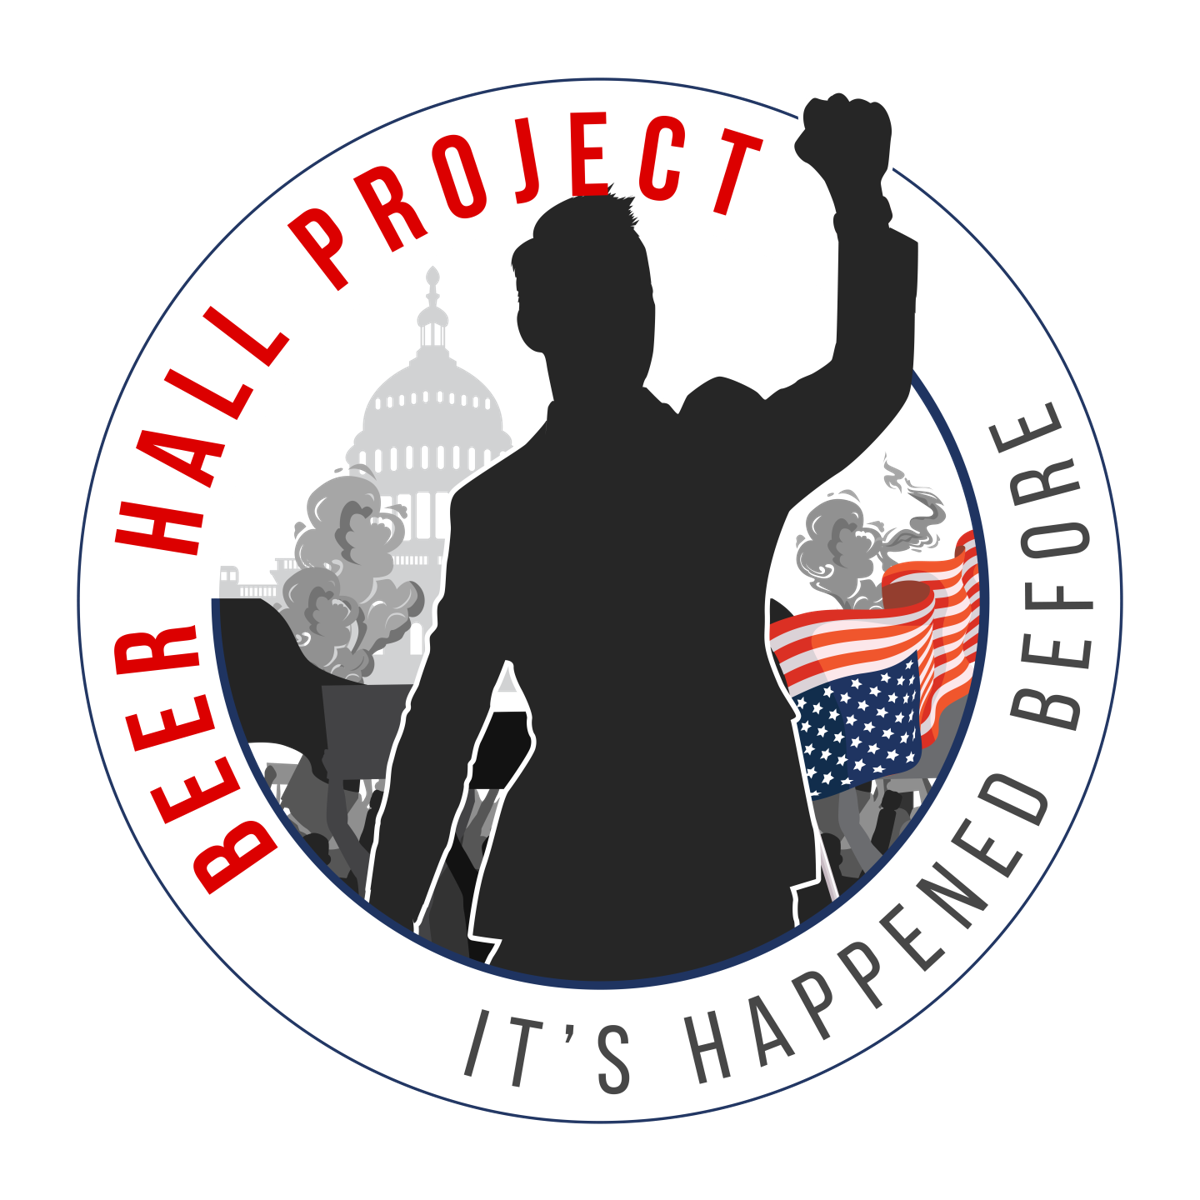 Beer Hall Project logo